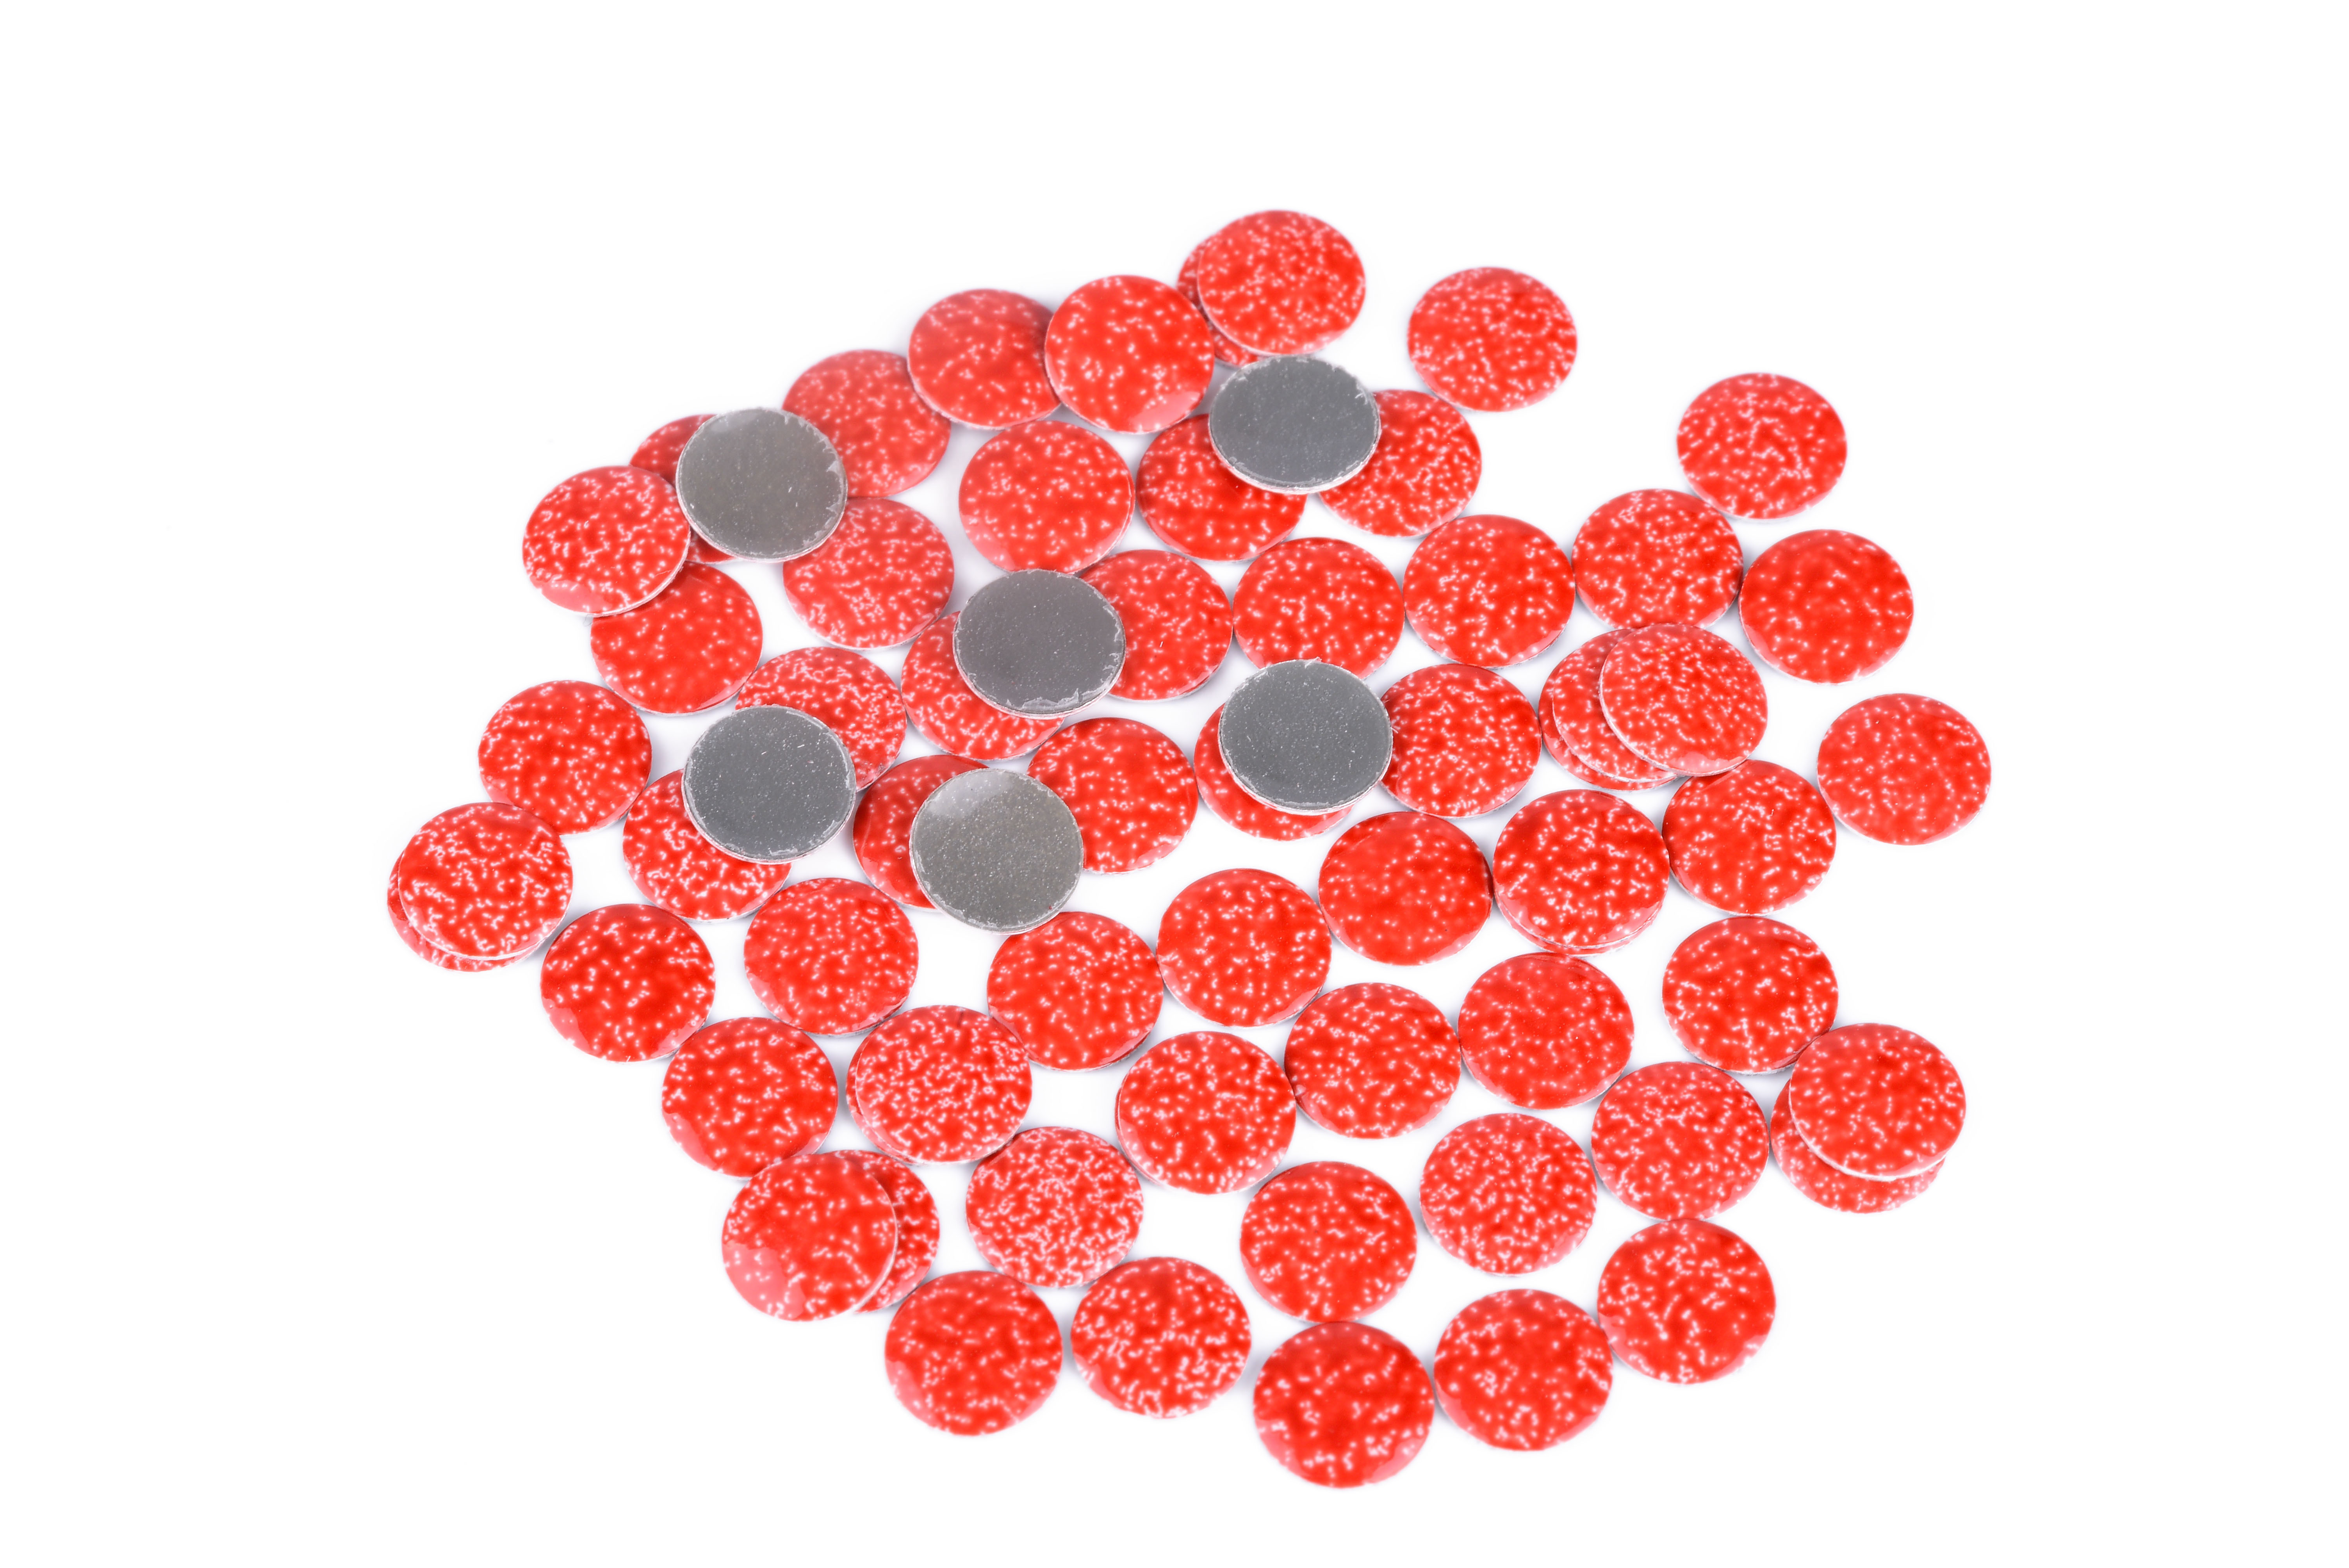  Lead Free Loose Hotfix Rhinestones Glass Material 12 / 14 Facets With Multi Colors Manufactures